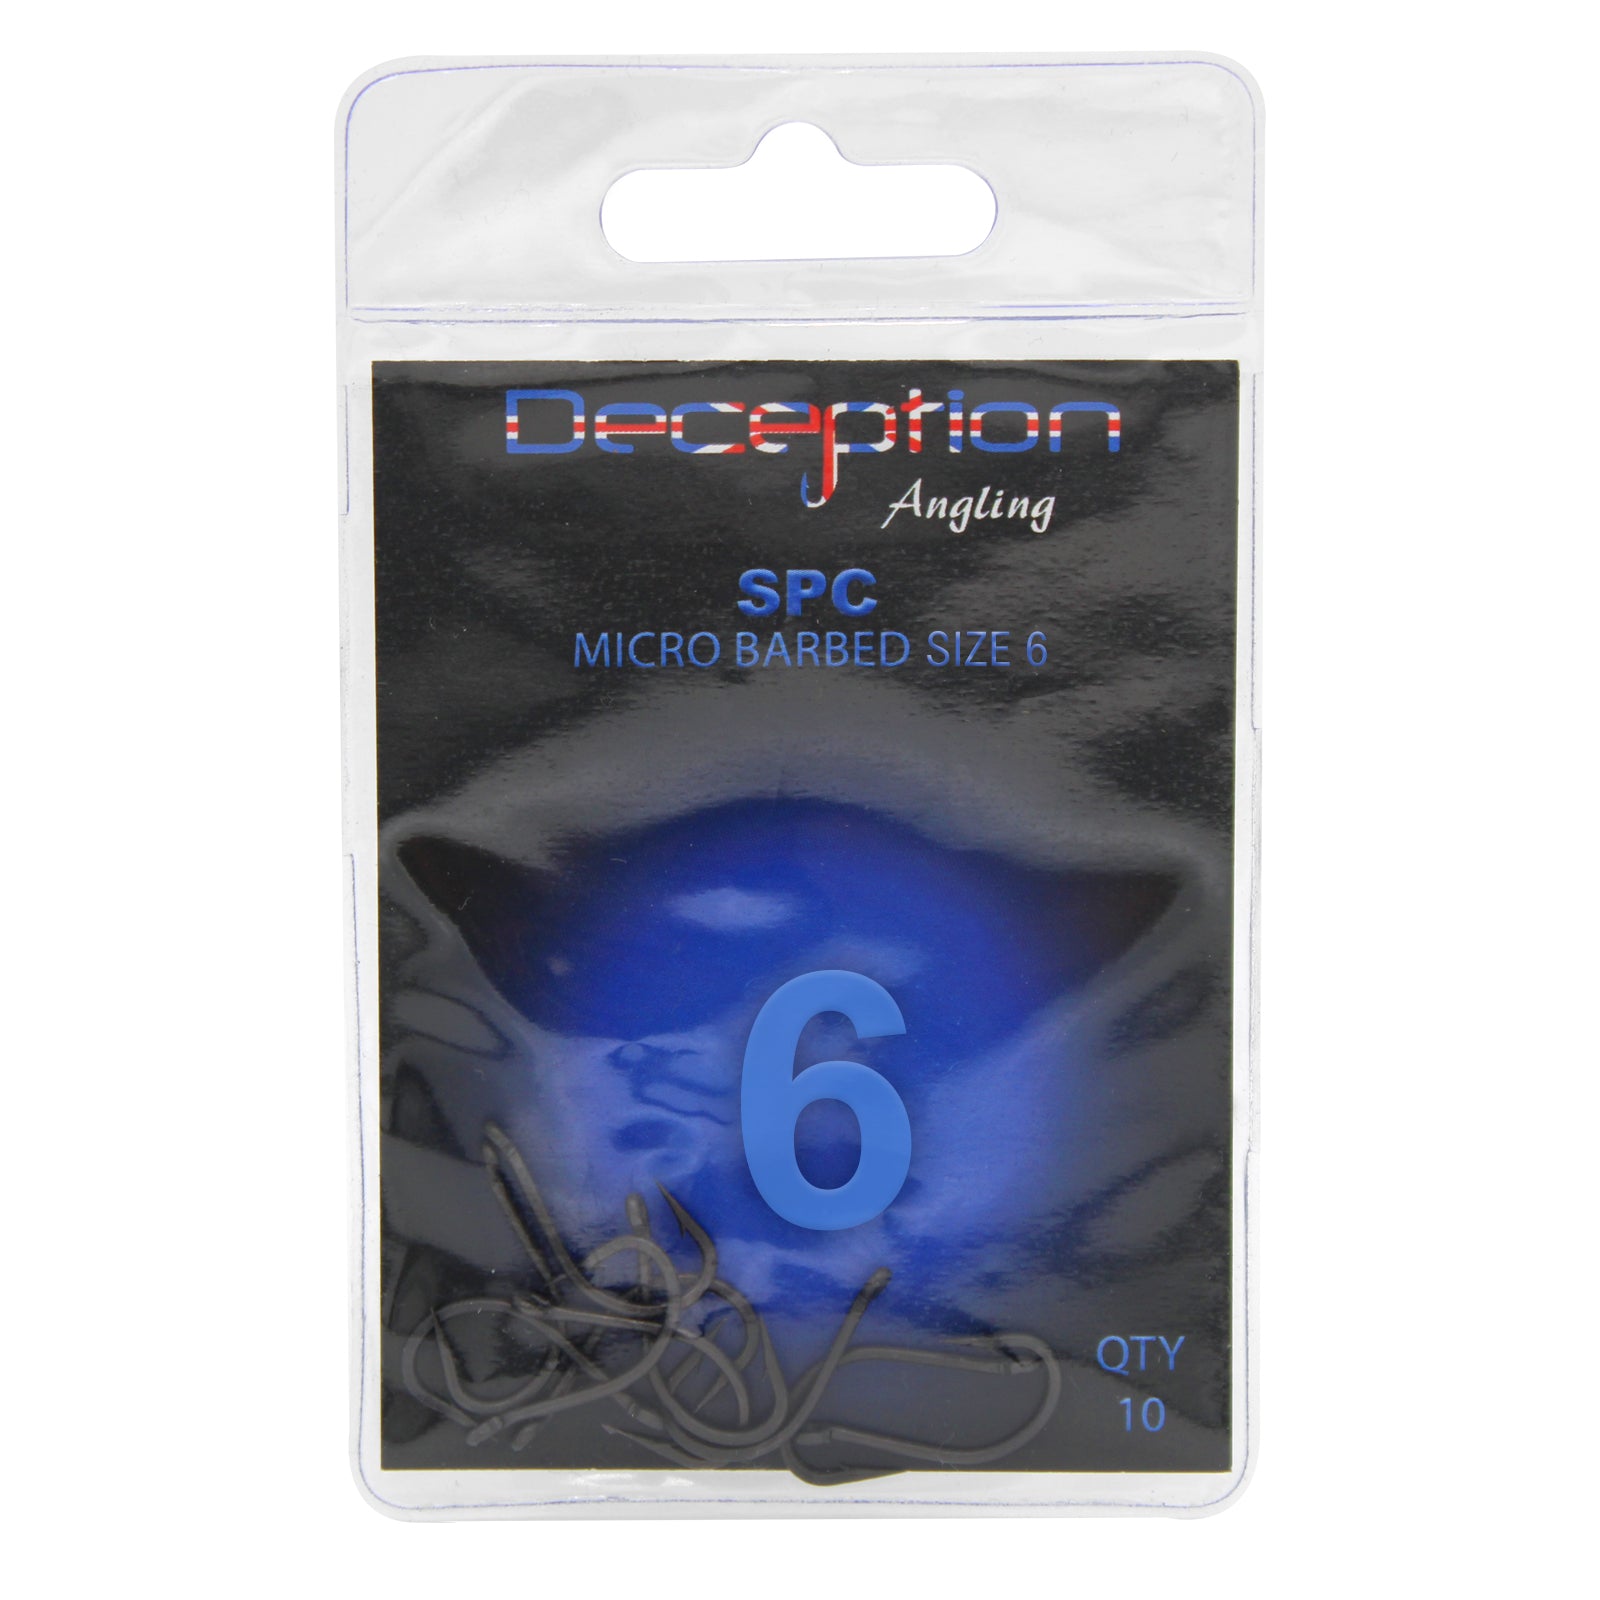 Deception Angling SPC Micro Barbed Pack of 10 Fishing Hooks Size 6